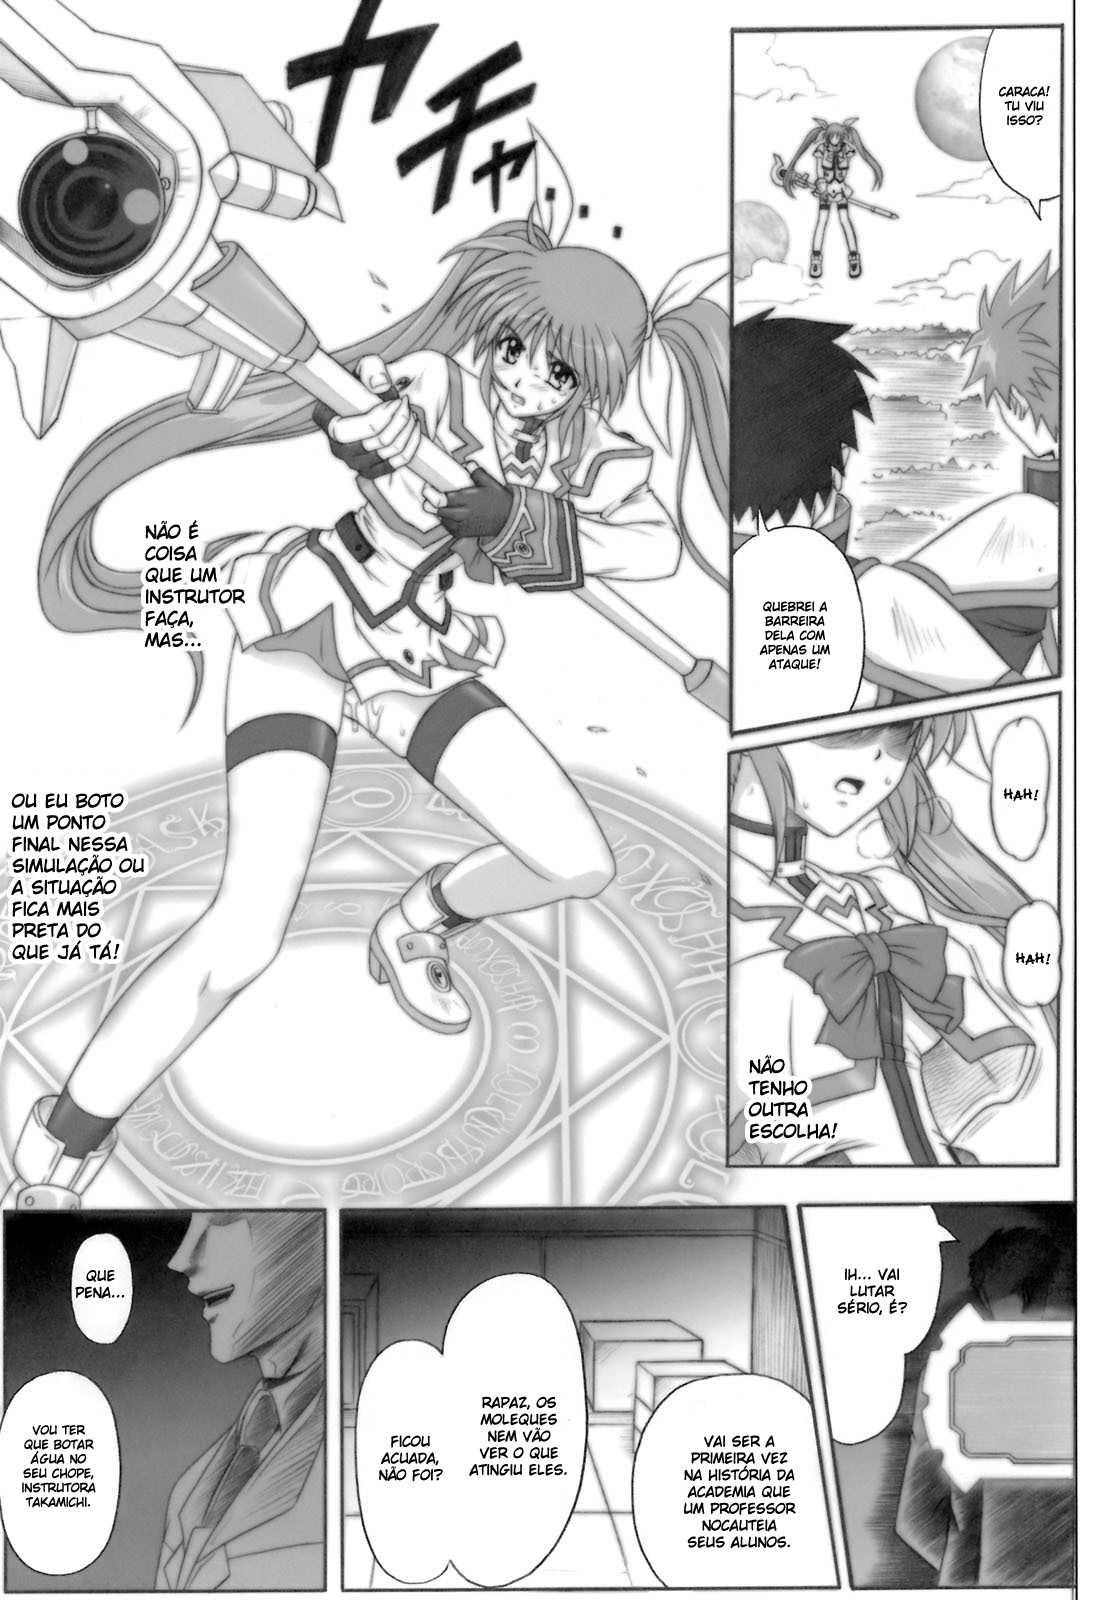 [CYCLONE (Izumi Kazuya)] 840 -Color Classic Situation Note Extention- (Mahou Shoujo Lyrical Nanoha) [Portuguese-BR] [サイクロン (和泉和也)] 840 -Color Classic Situation Note Extention- (魔法少女リリカルなのは)